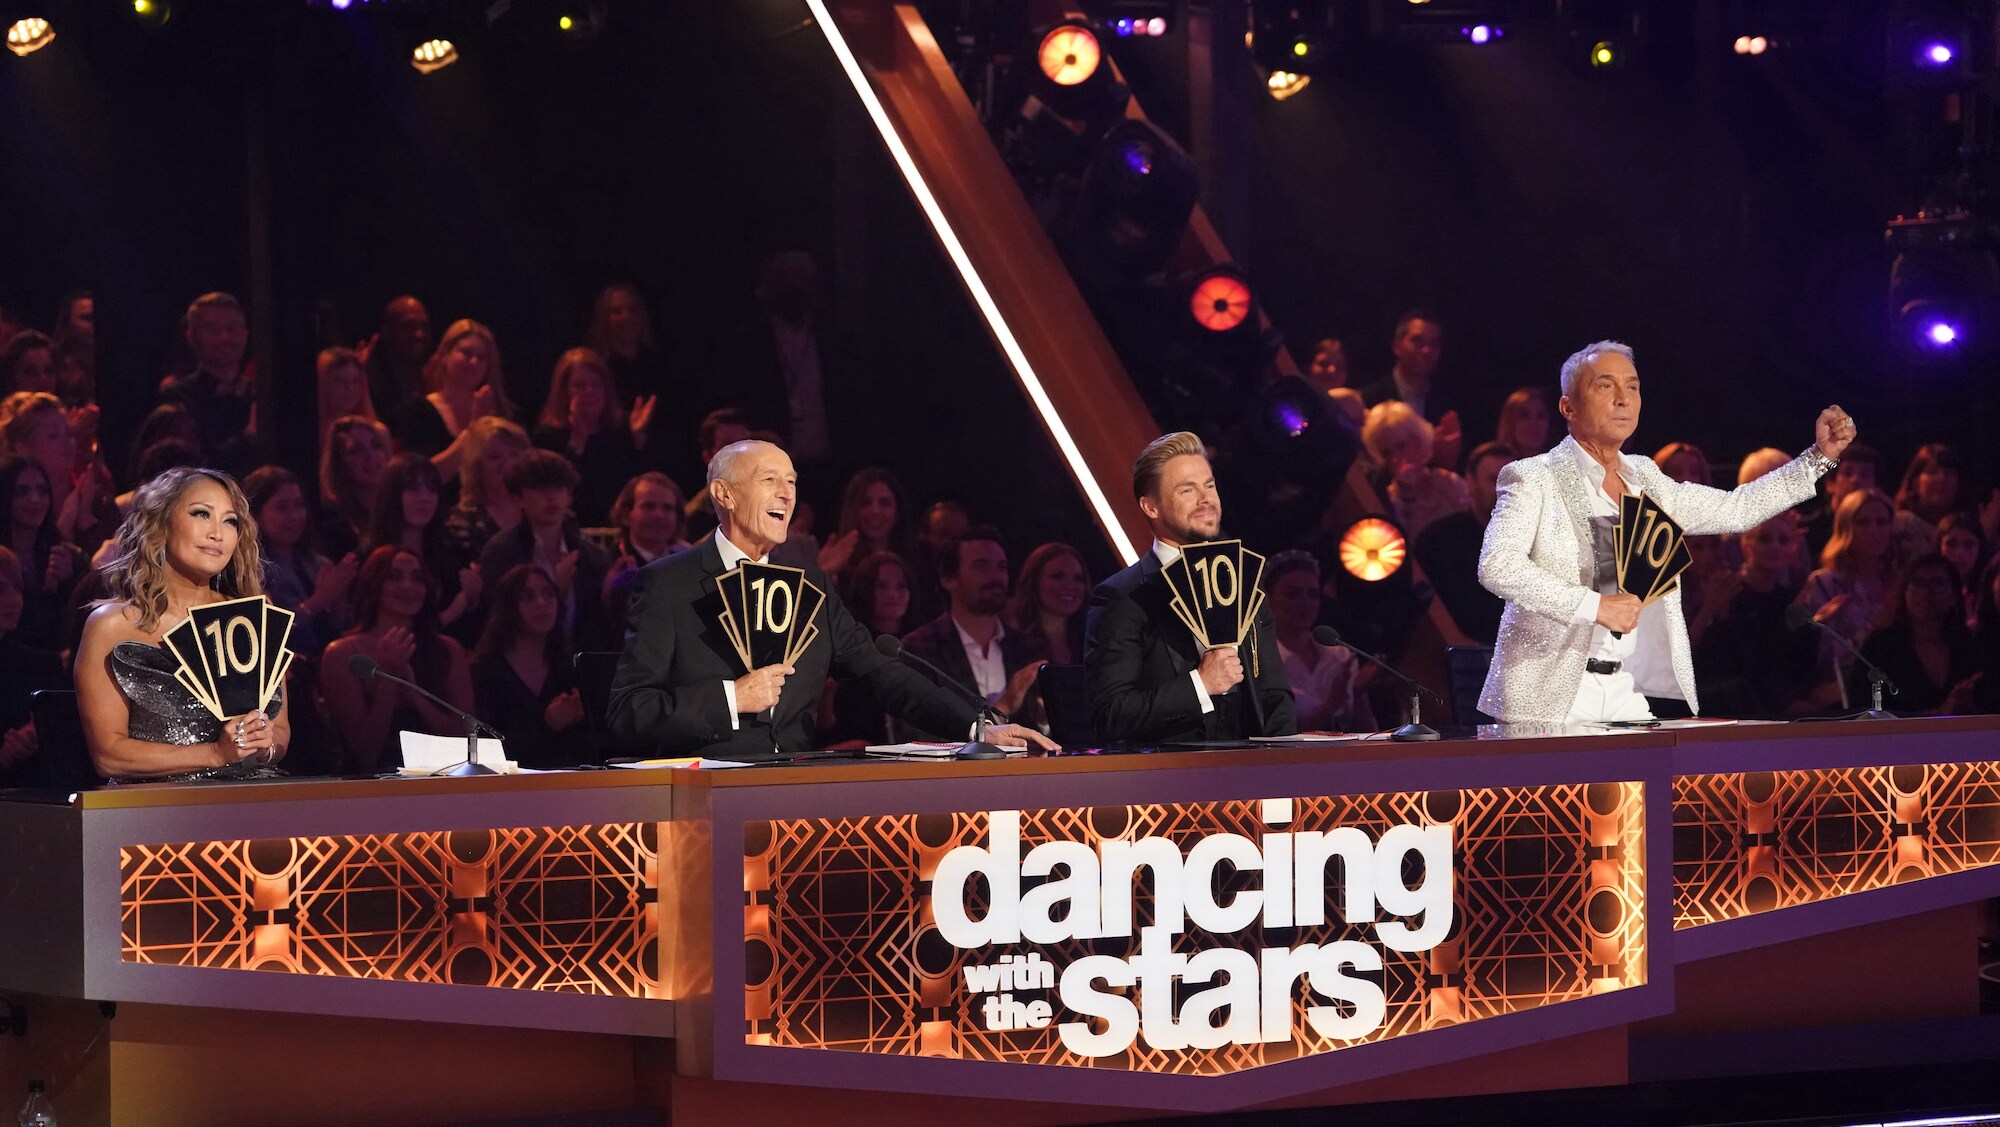 DANCING WITH THE STARS - “Finale” – The four finalists perform their final two routines in hopes of winning the mirrorball trophy. Each couple will perform a redemption dance and an unforgettable freestyle routine. A new episode of “Dancing with the Stars” will stream live MONDAY, NOV. 21 (8:00pm ET / 5:00pm PT), on Disney+. (ABC/Eric McCandless) CARRIE ANN INABA, LEN GOODMAN, DEREK HOUGH, BRUNO TONIOLI